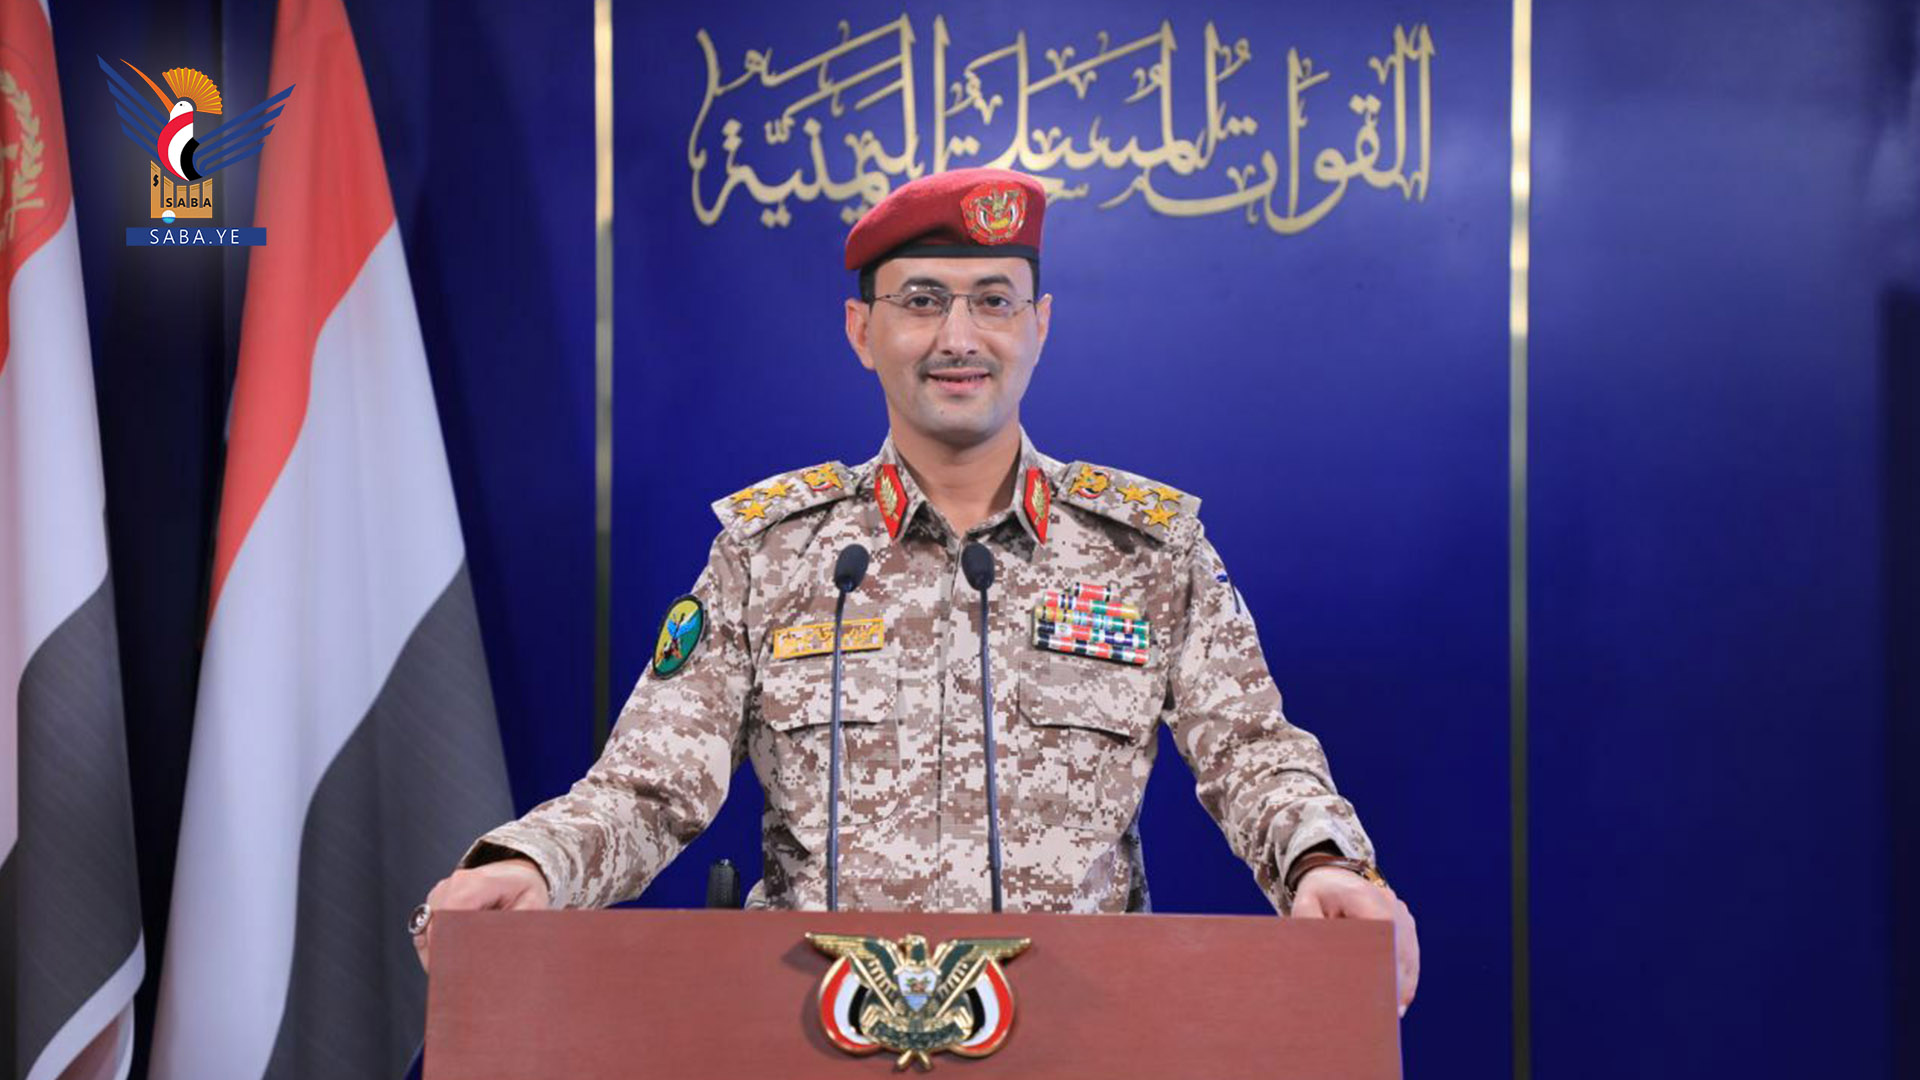 Brigadier General Saree reveals in press conference harvest of eight years of steadfastness &confrontation with aggression